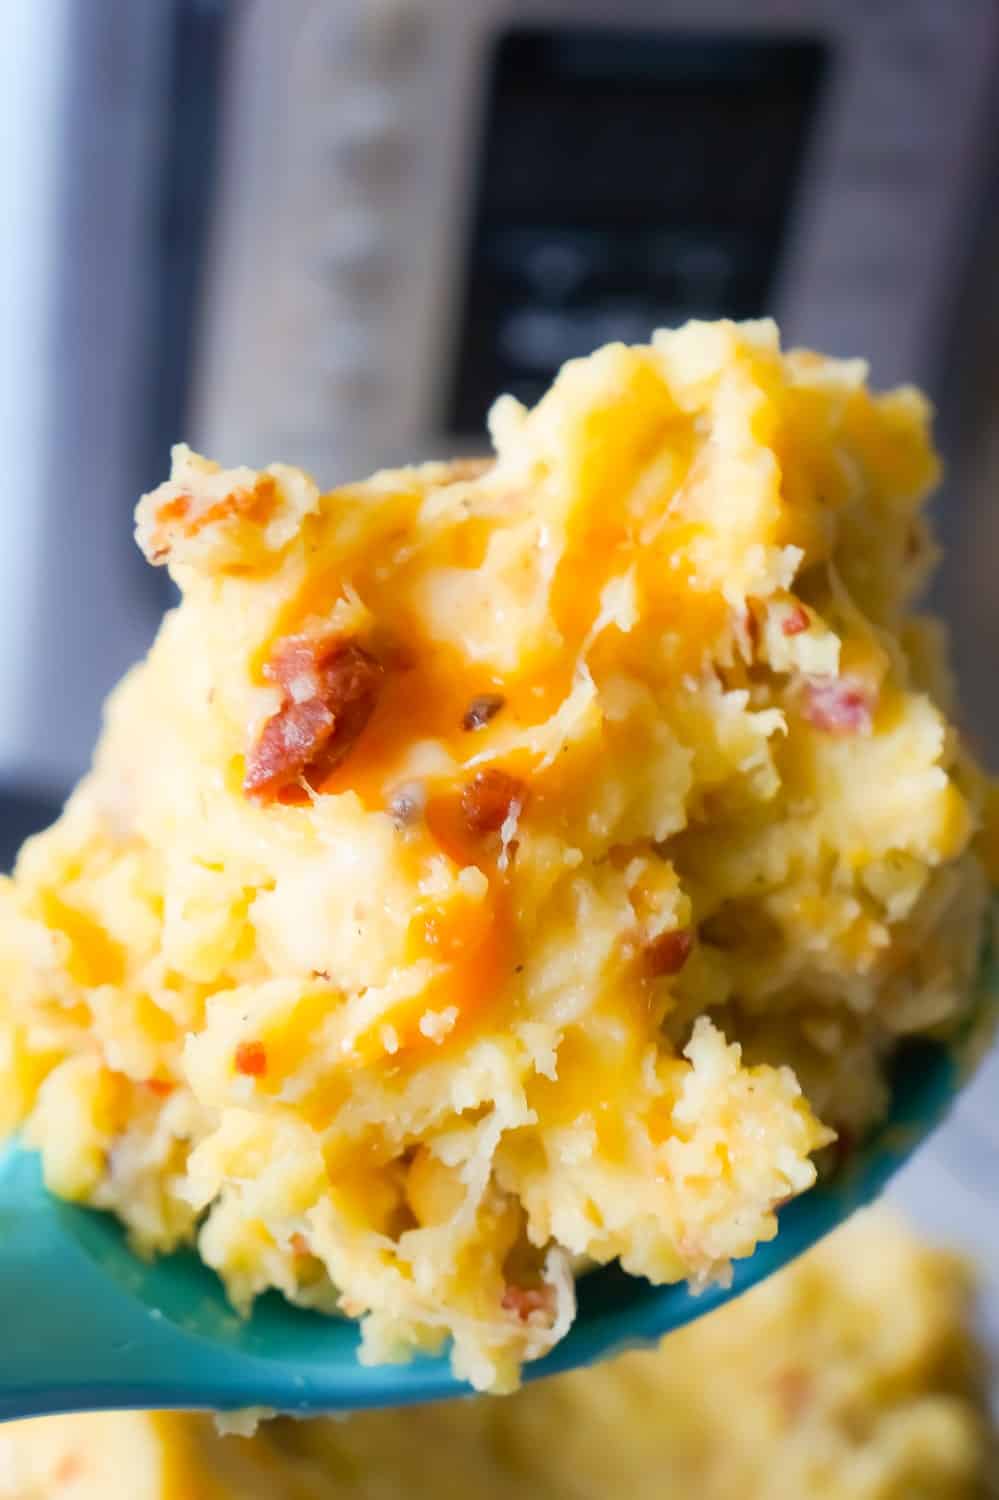 Instant Pot Cheesy Bacon Mashed Potatoes are a delicious pressure cooker side dish recipe using cream of bacon soup, crumbled bacon, cheddar and mozzarella cheese.